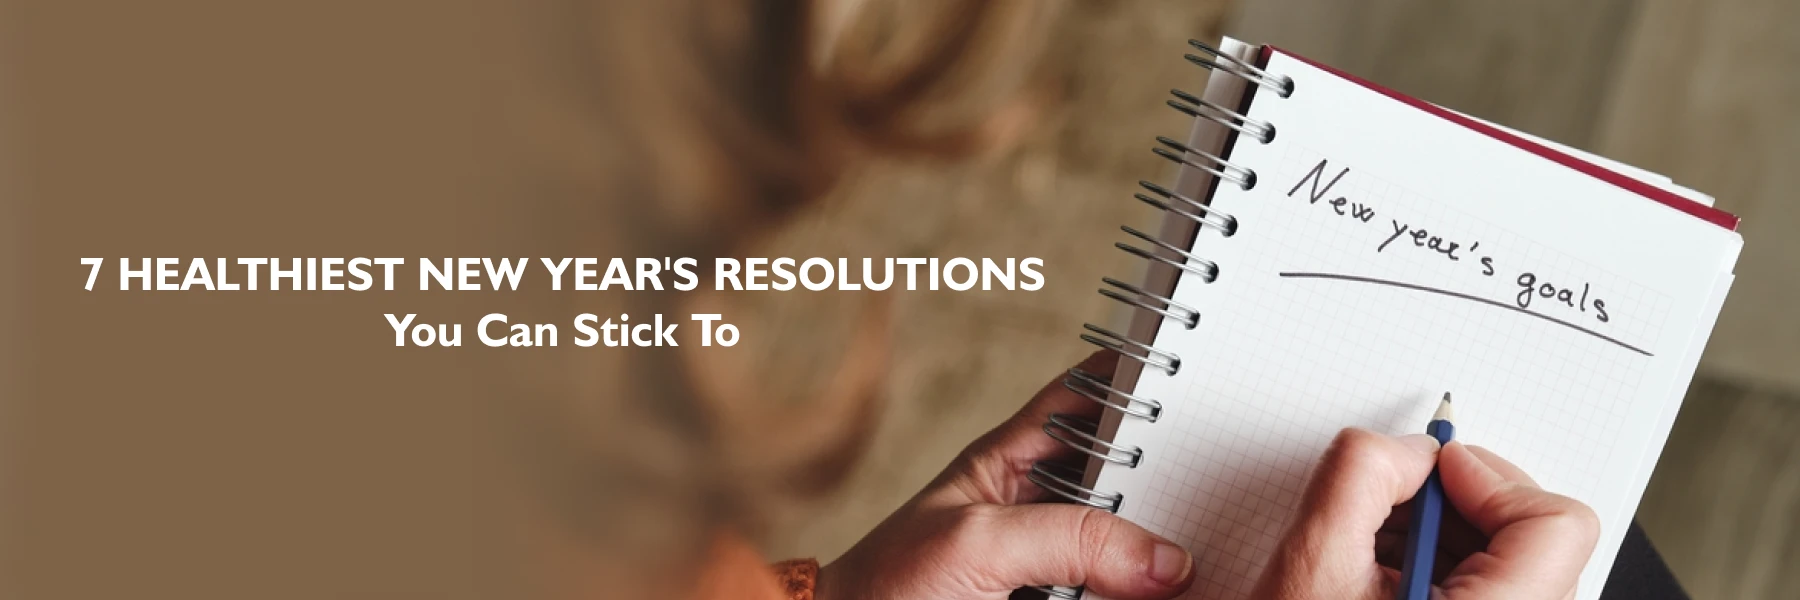 7 Healthiest New Year's Resolutions